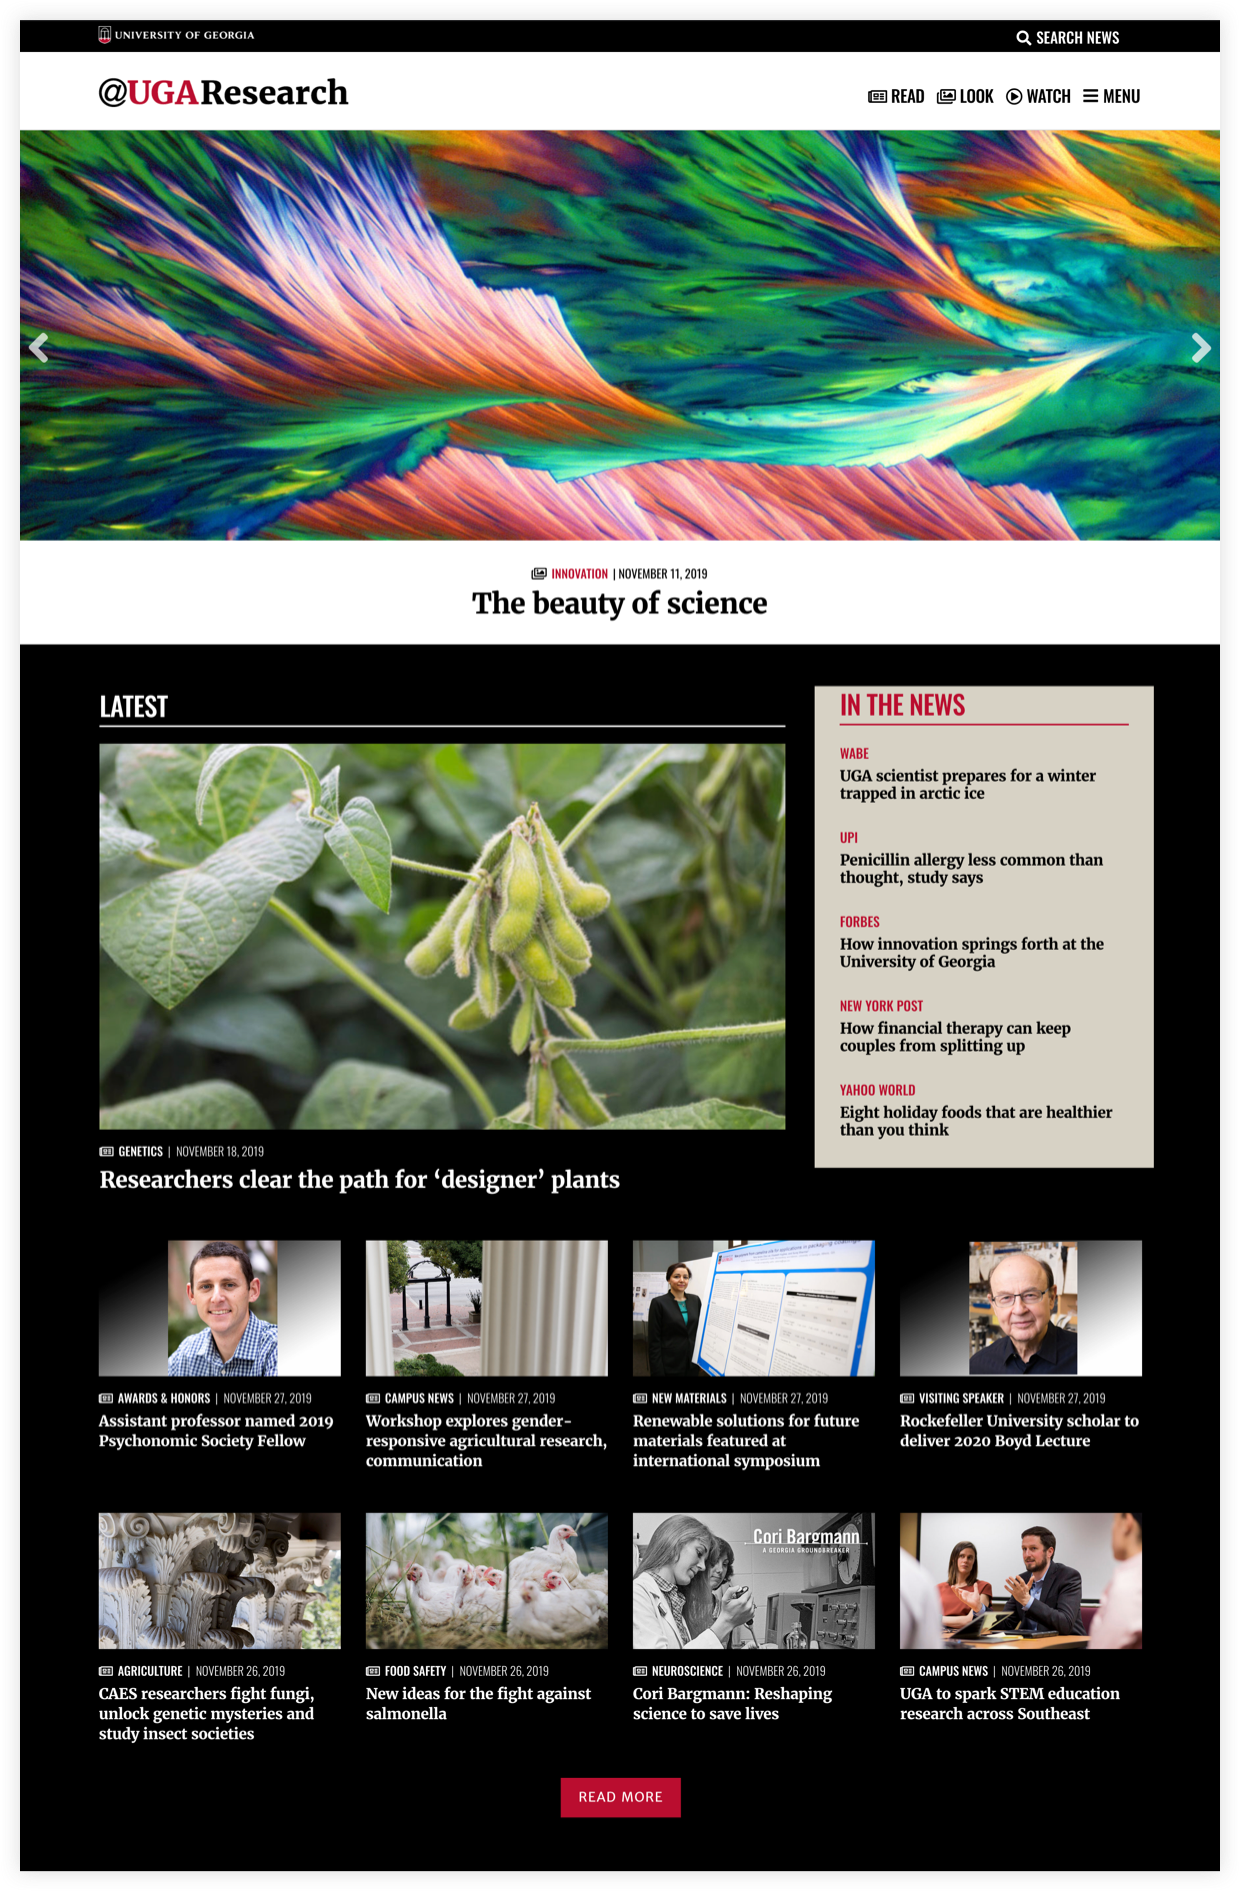 UGA Research News homepage featuring slideshow and latest news